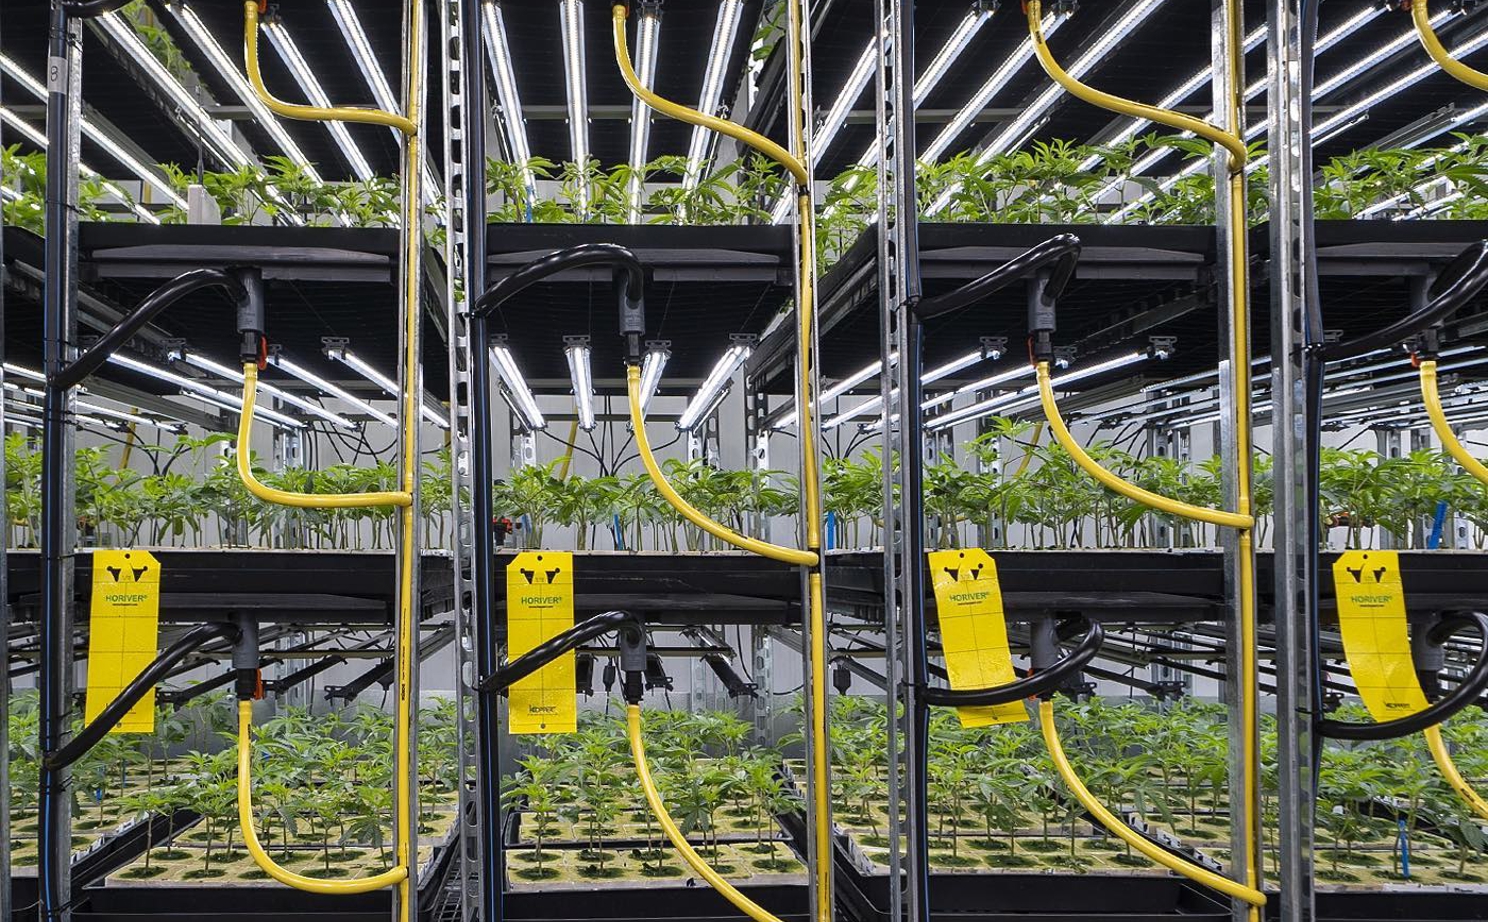 Trays of cannabis clones in a greenhouse nursery